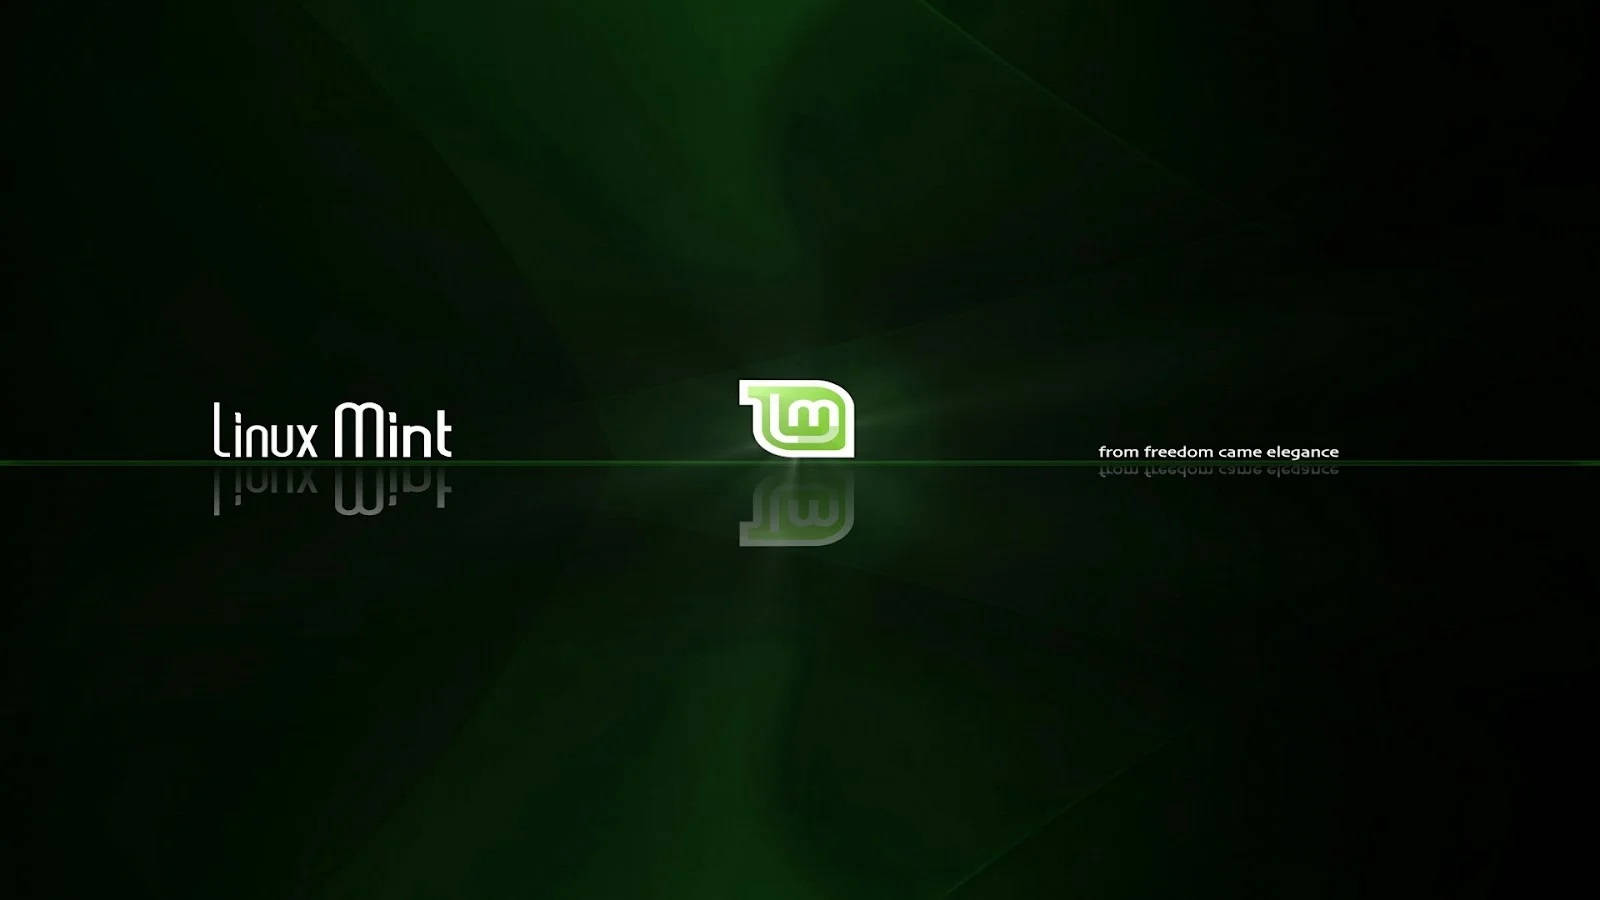 Linux Mint Slogan From Freedom Came Elegance Wallpaper